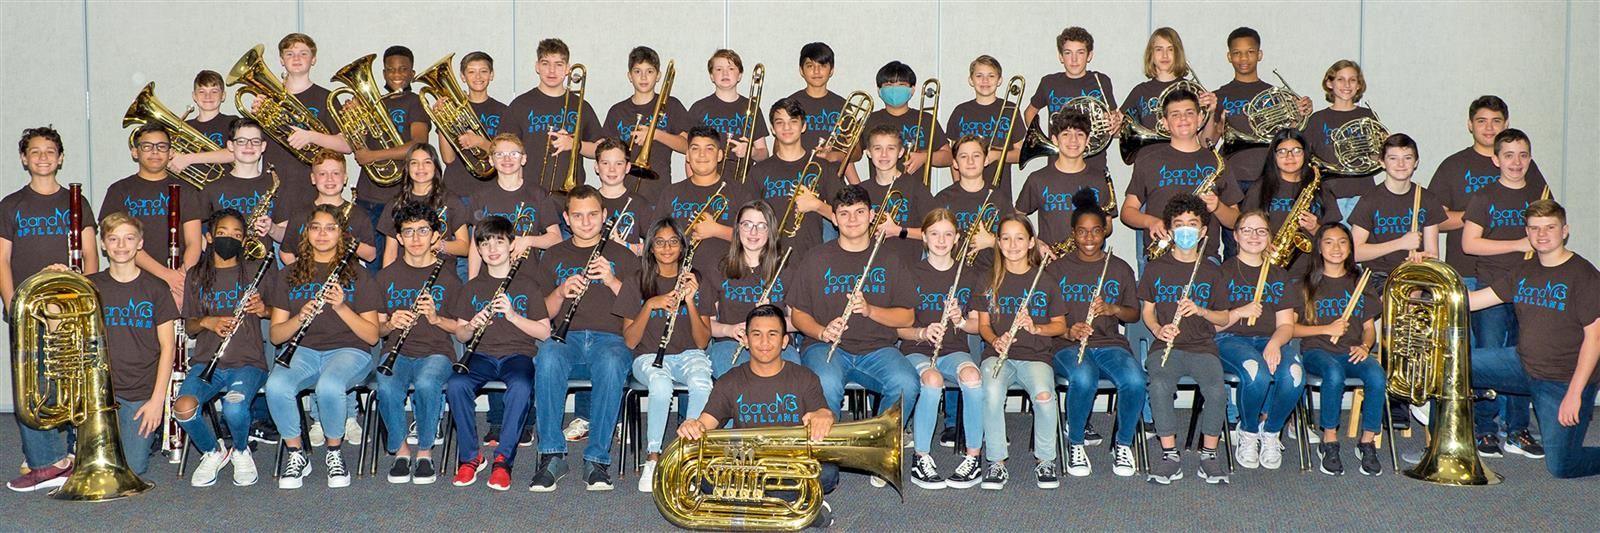 The Spillane Middle School symphonic band, directed by Cole Smith, earned a Citation of Excellence.